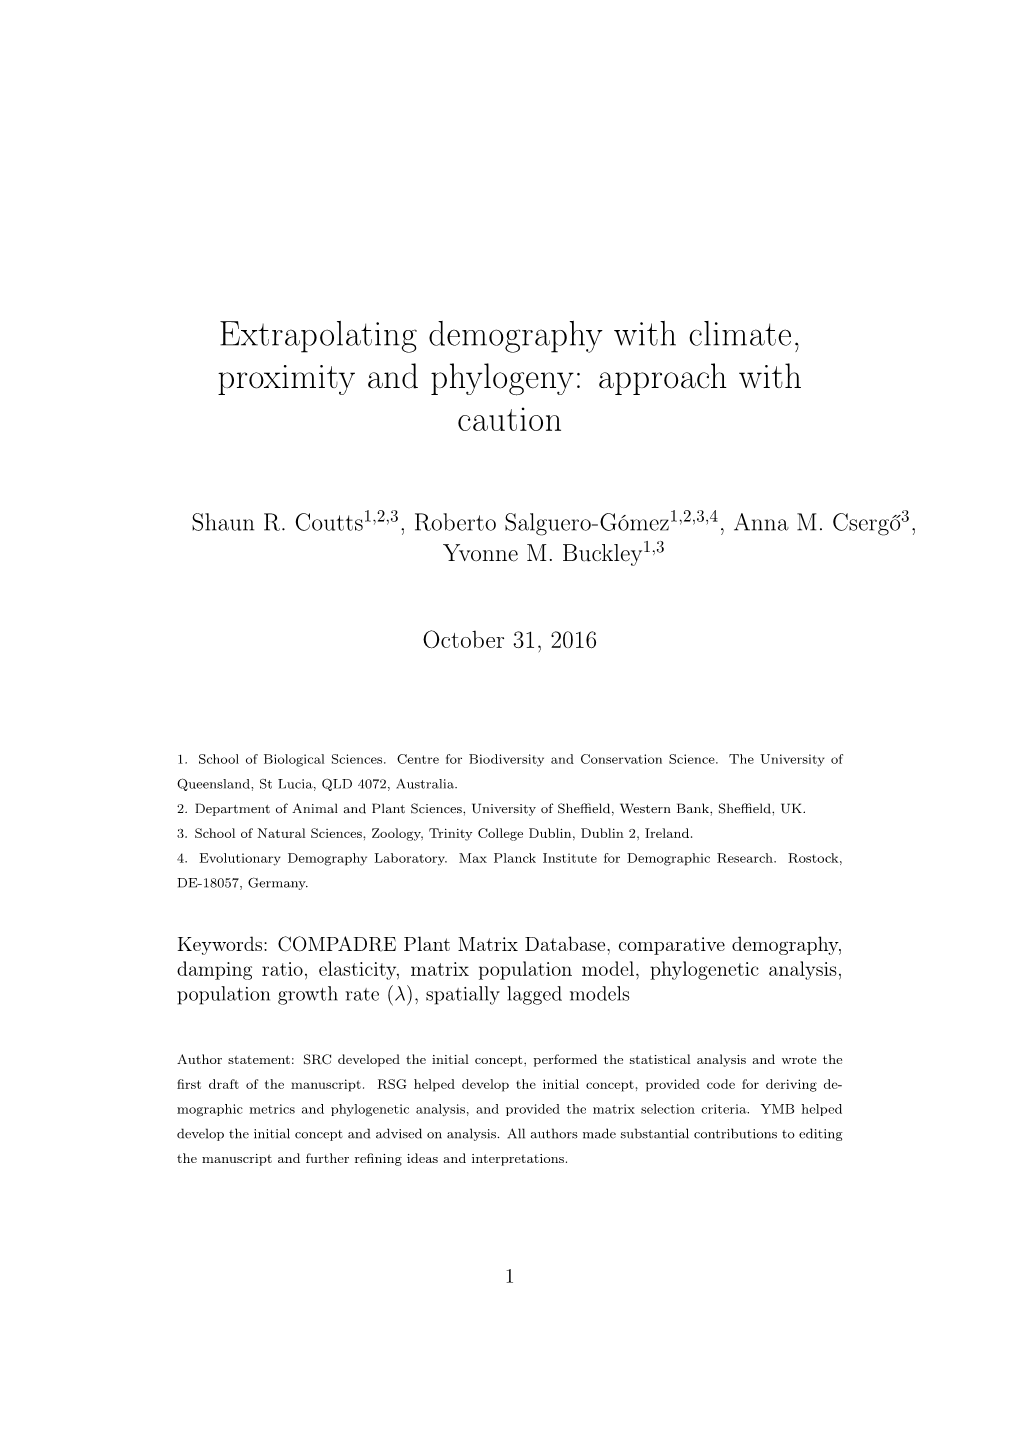 Extrapolating Demography with Climate, Proximity and Phylogeny: Approach with Caution